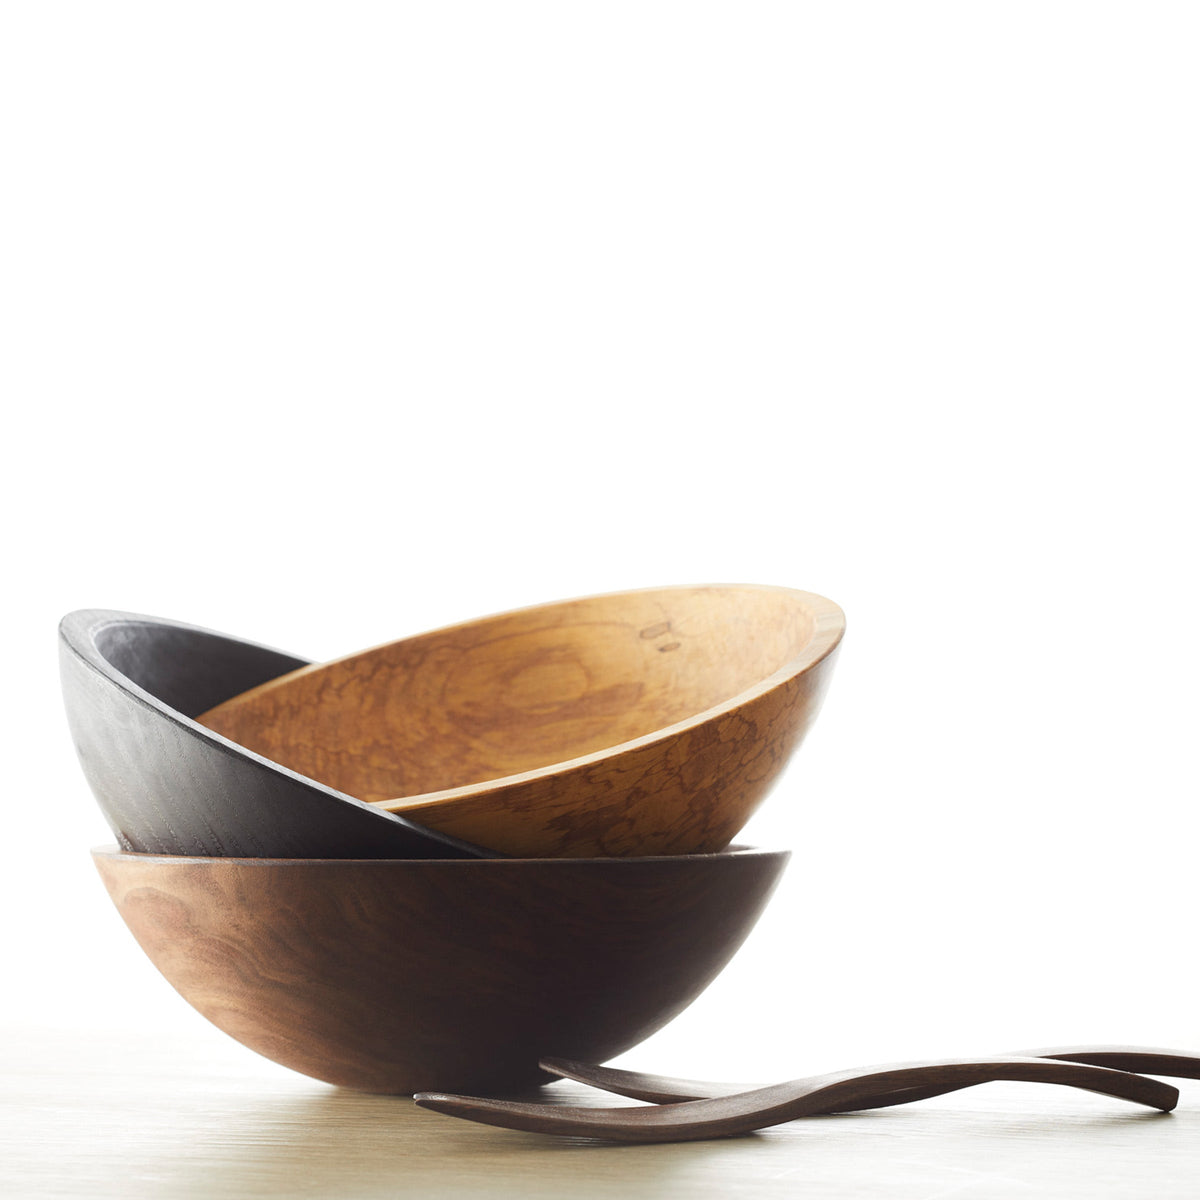 Three Peterman&#39;s Ebonized Oak 13&quot; Handcrafted Serving Bowls, crafted from oak hardwood, resting on a table.